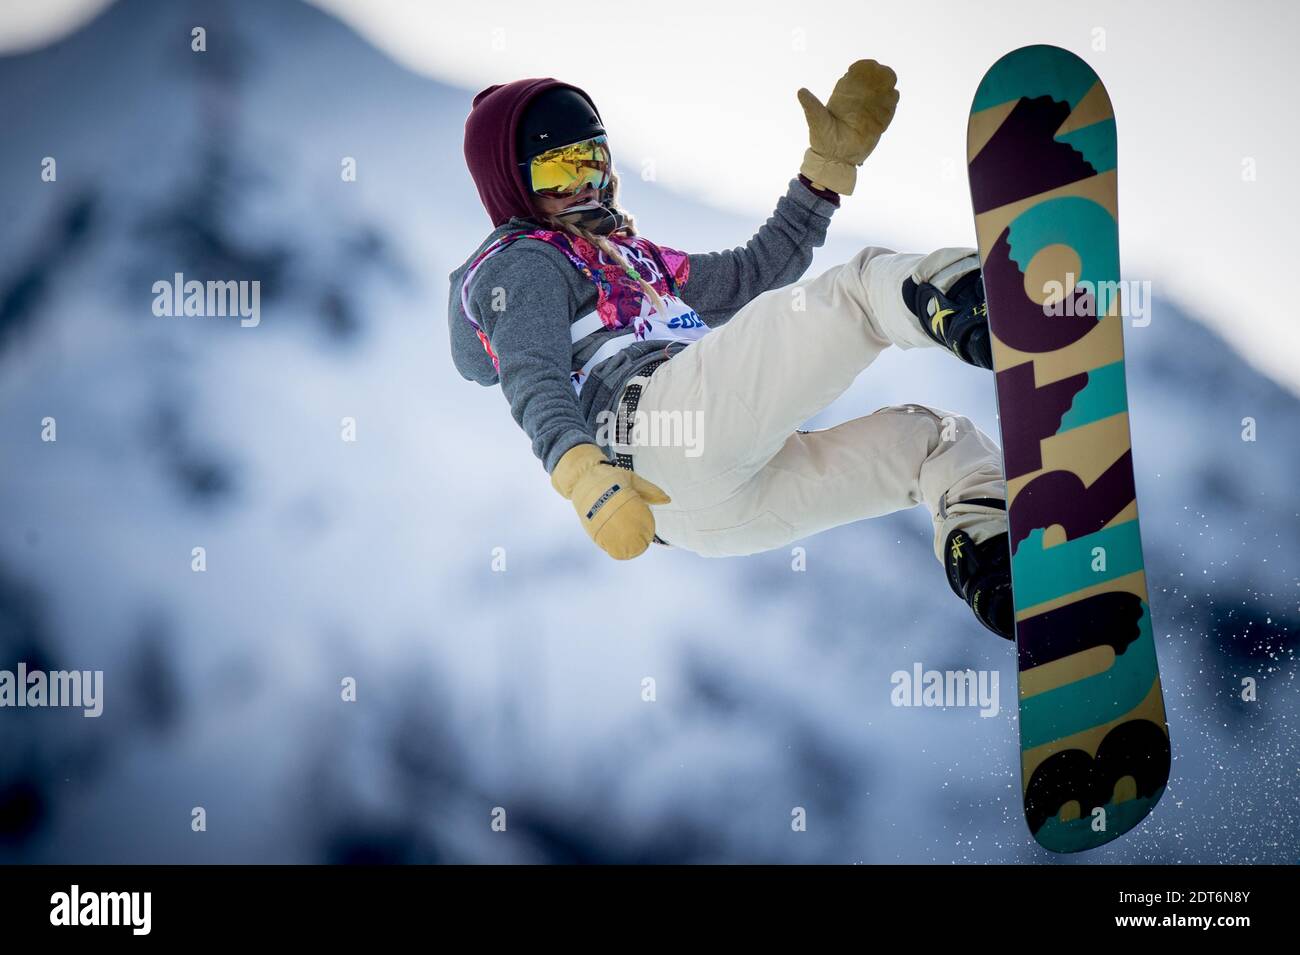 USA's Kelly Clark competes on ladies' Halfpipe snowboard qualification  during at Rosa Khutor Extreme Park during Sochi 2014 Olympic Games, in  Sochi Russia, 12 February 2014. The Sochi 2014 Olympic Games run